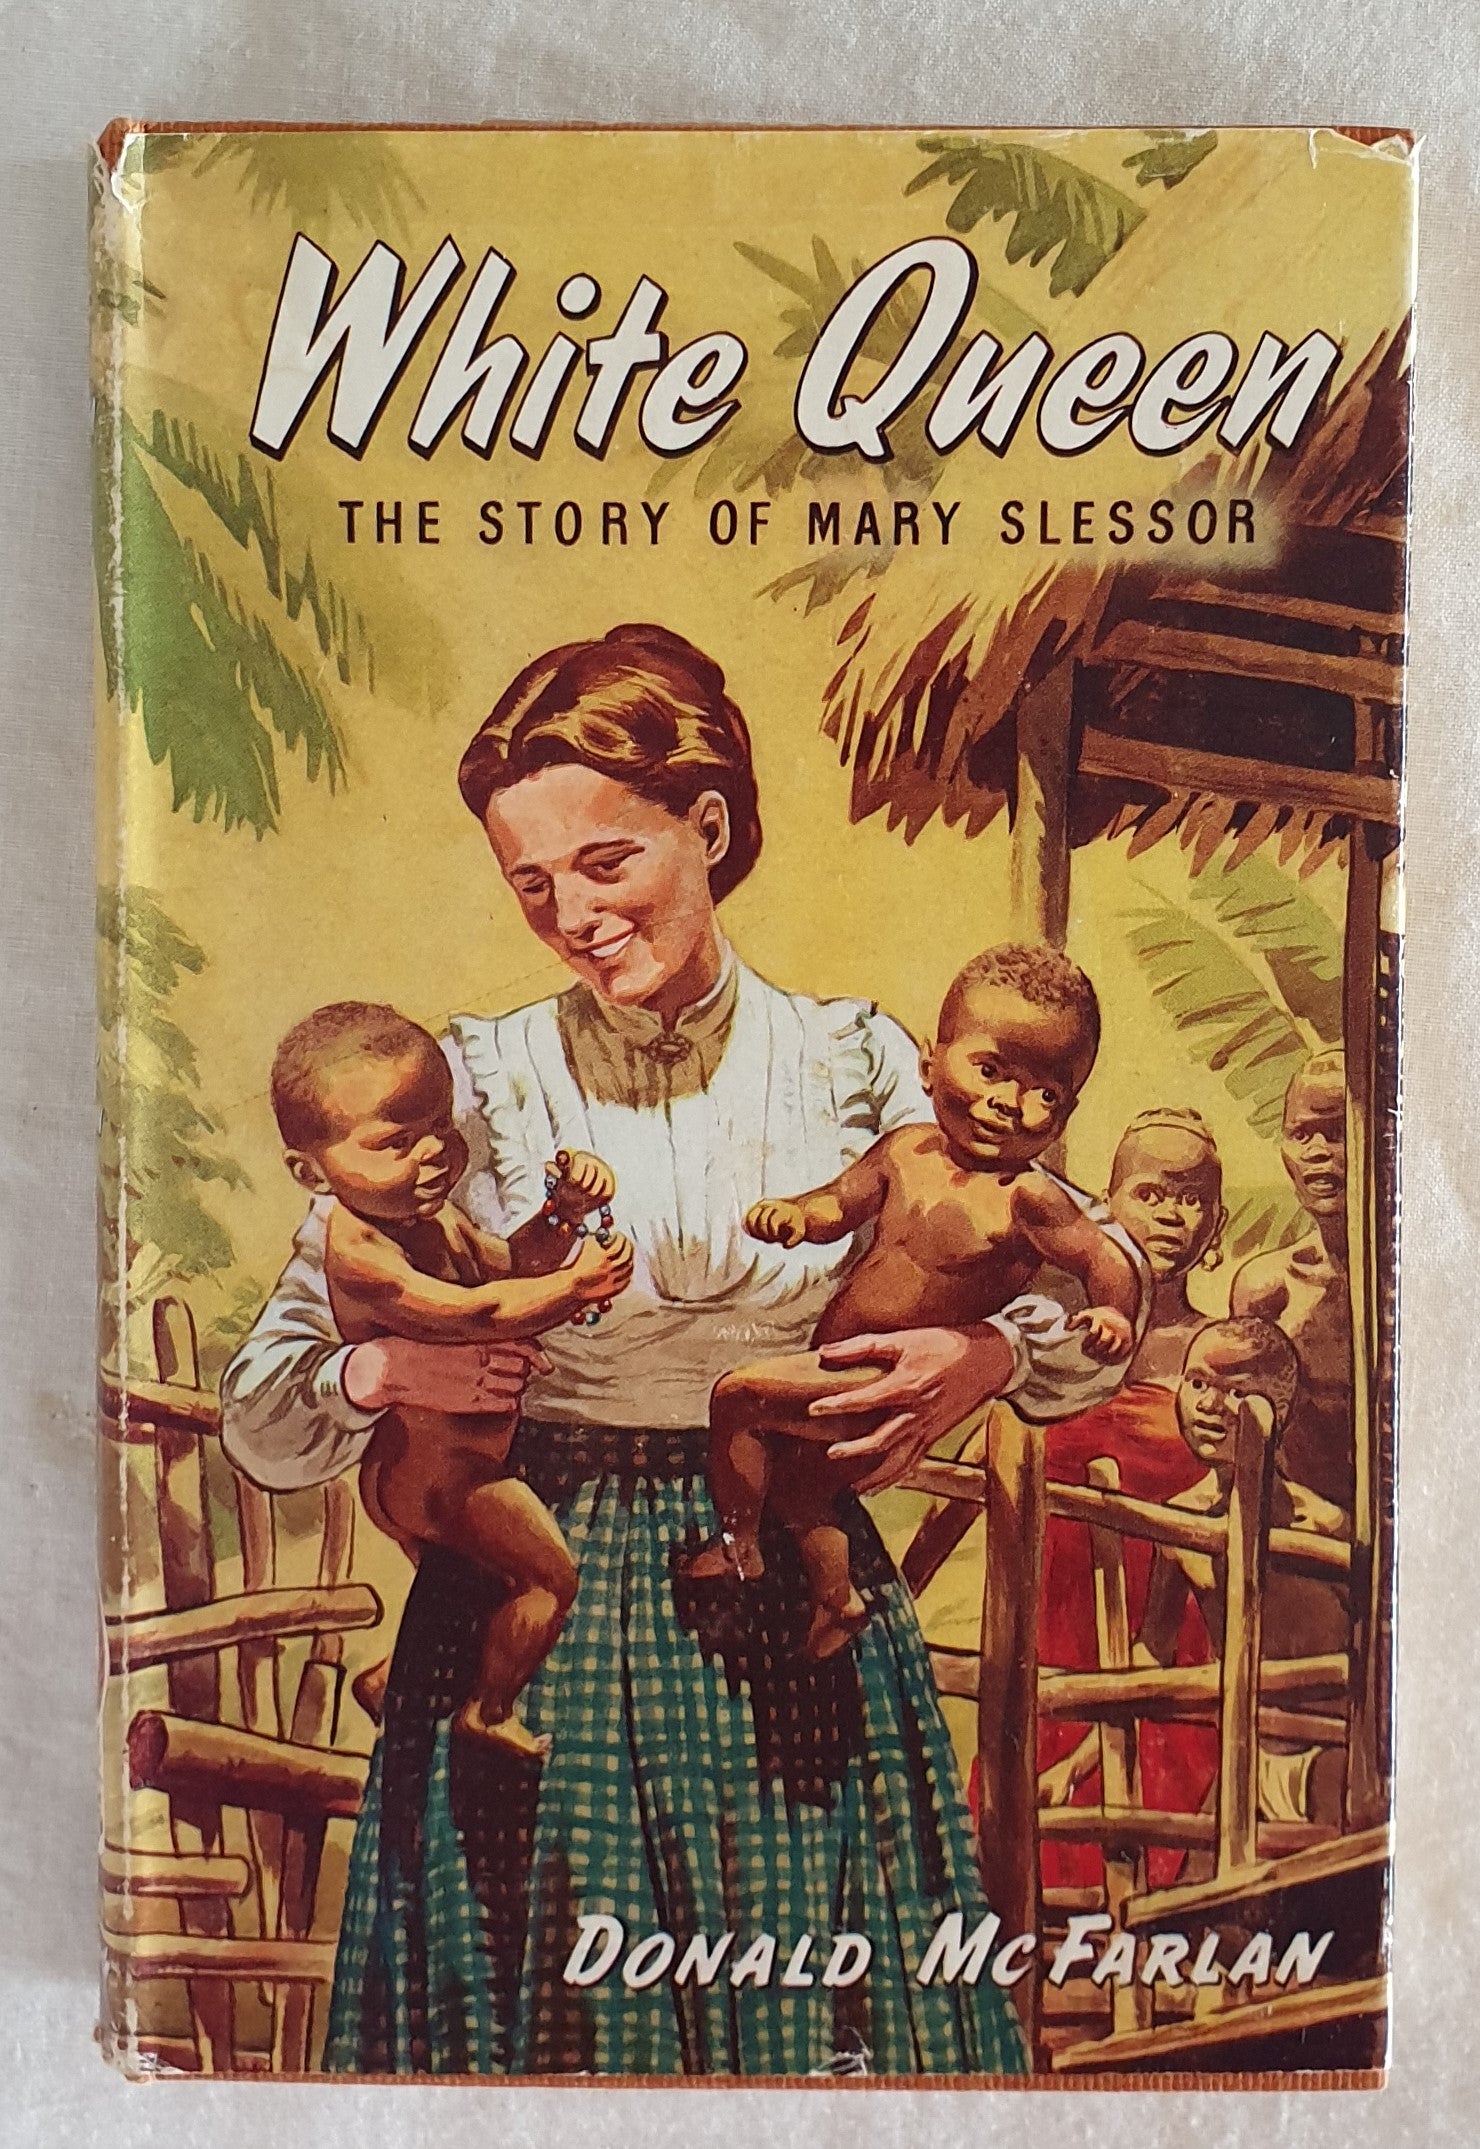 White Queen by Donald McFarlan